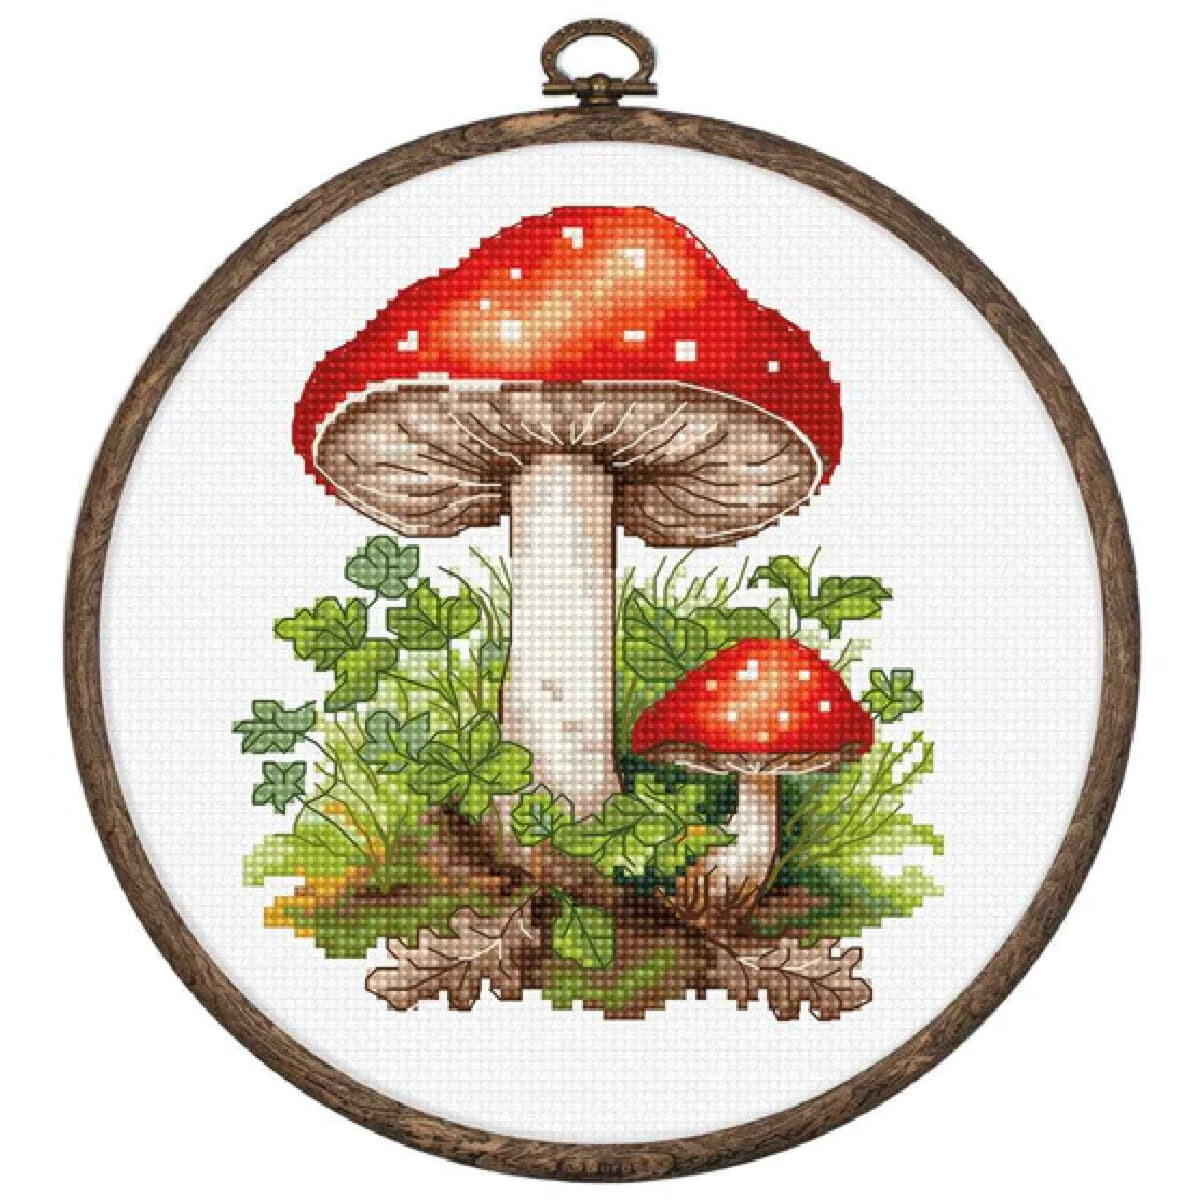 A Luca-s embroidery pack features two mushrooms with red...